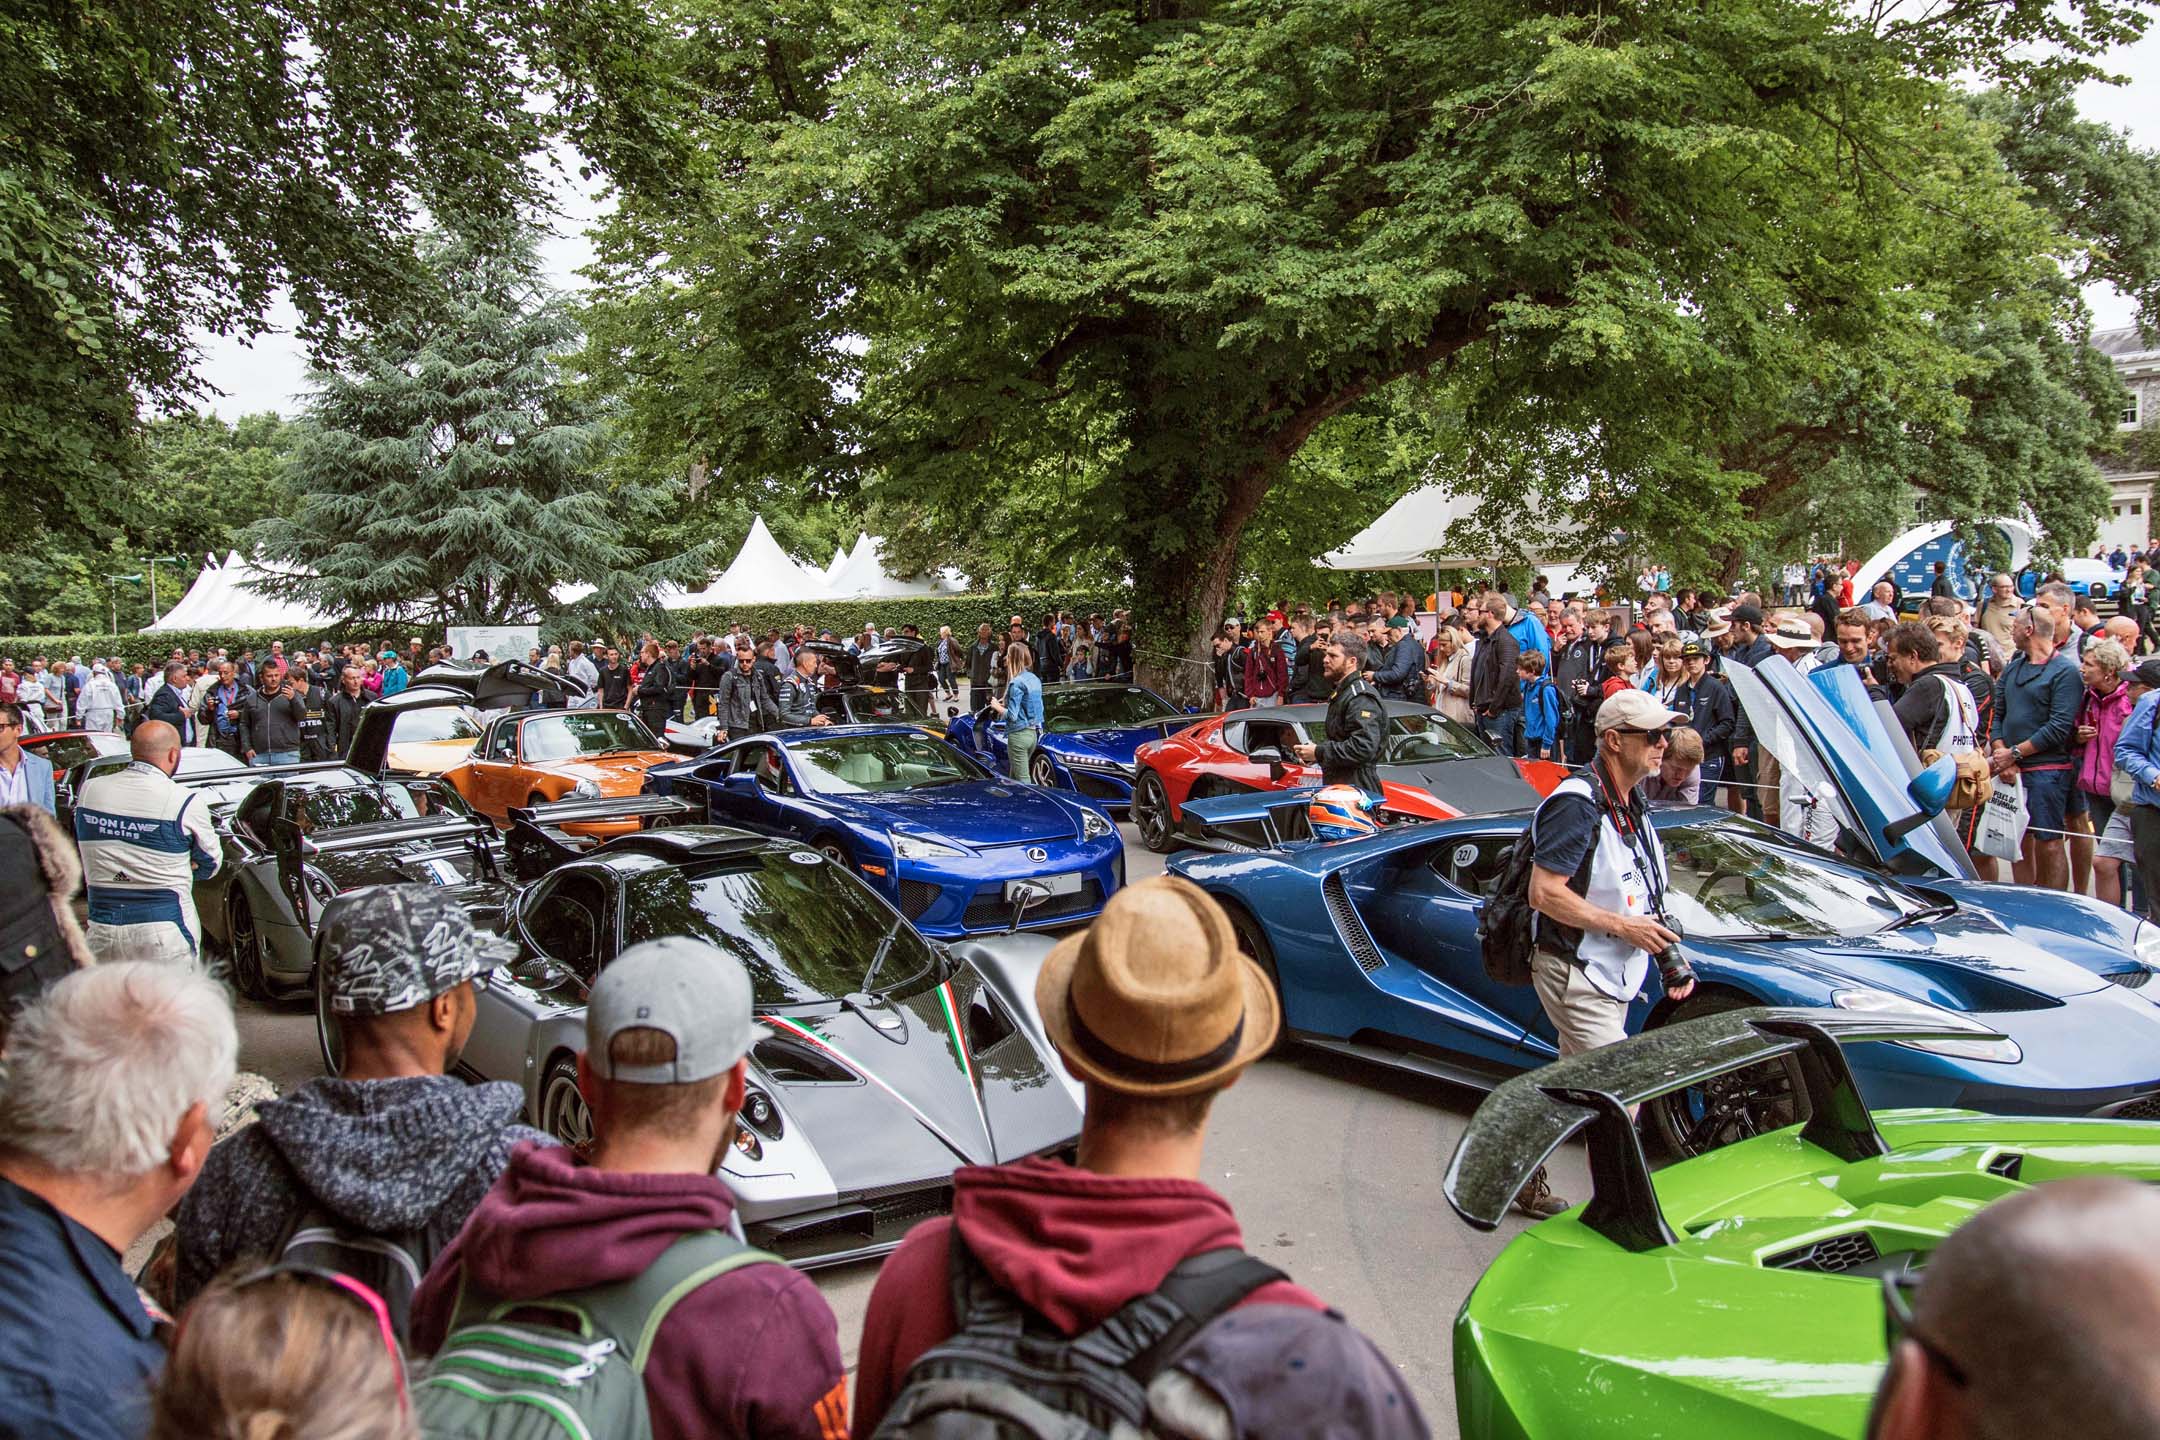 Gathered in the pre-staging paddock, all manner of supercars jostle for position. While a low time up the hill doesn’t come with an official FIA trophy, it’s certainly bragging rights for both the driver and the machine.